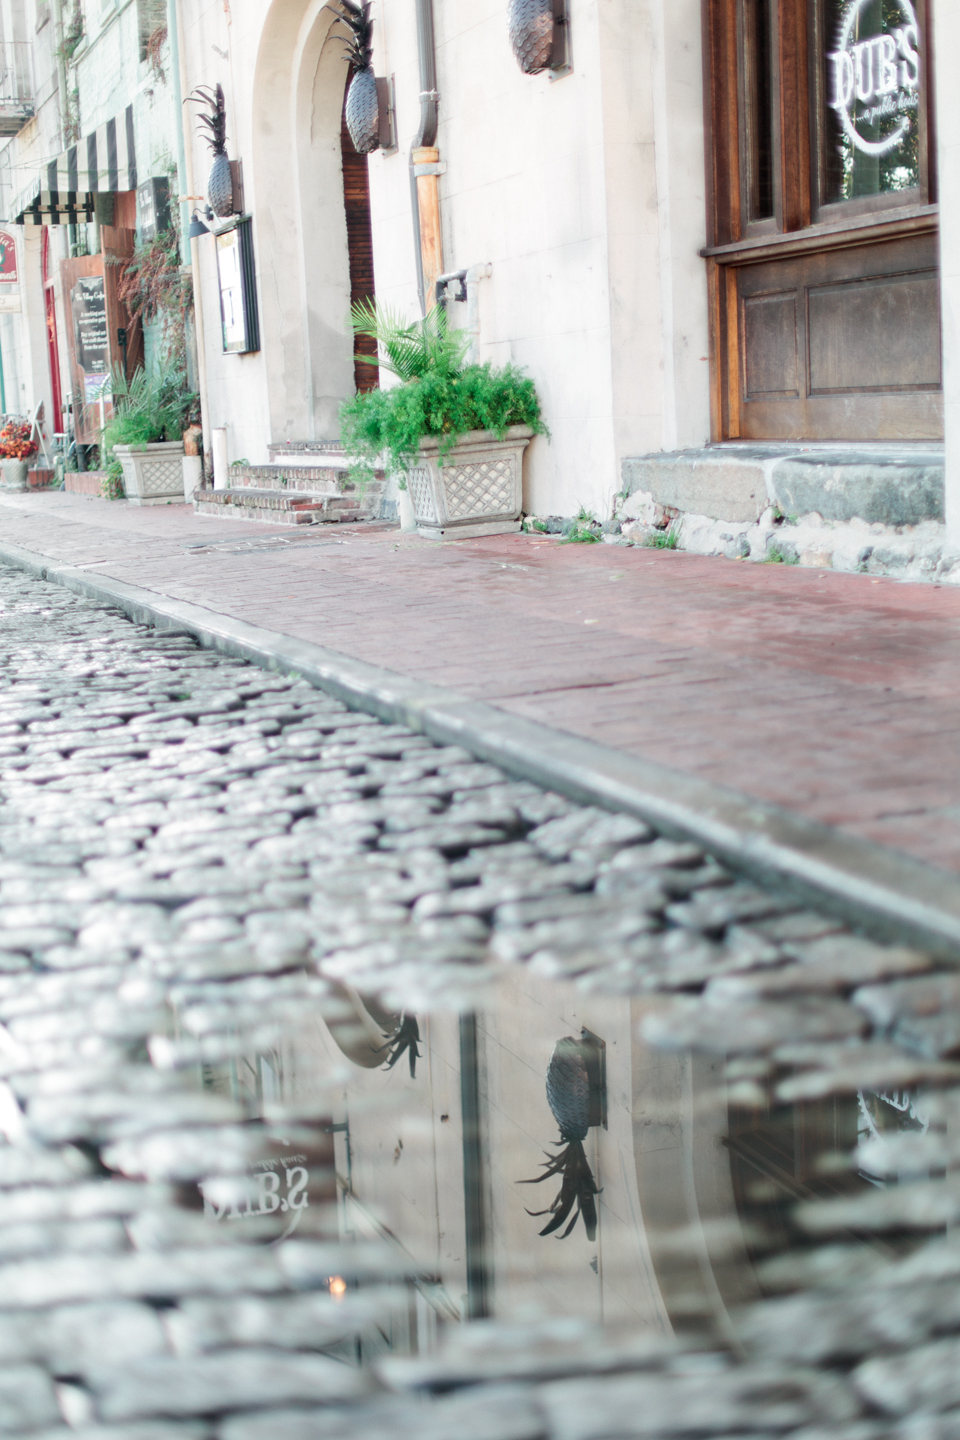 Image of a cobblestone street with a puddle of water on East River Street in historic downtown Savannah, Georgia.